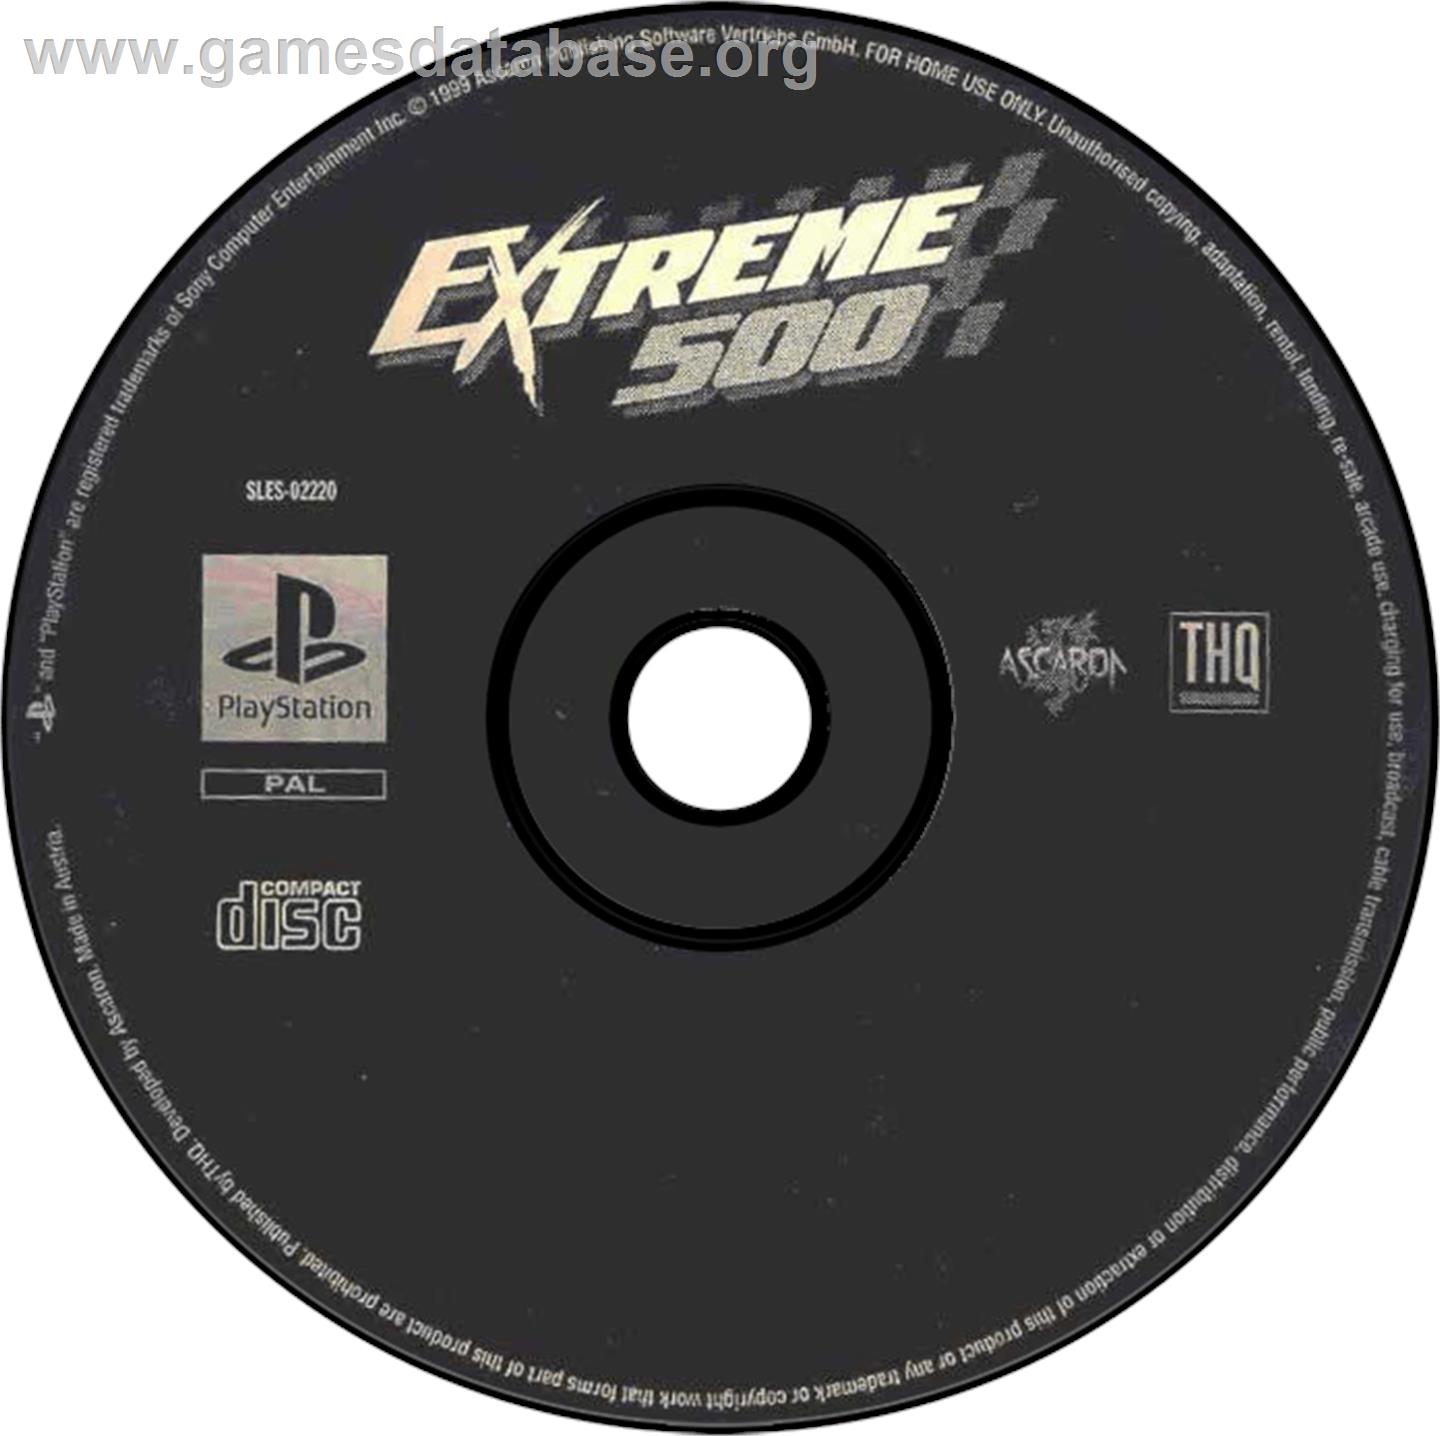 Extreme 500 - Sony Playstation - Artwork - Disc